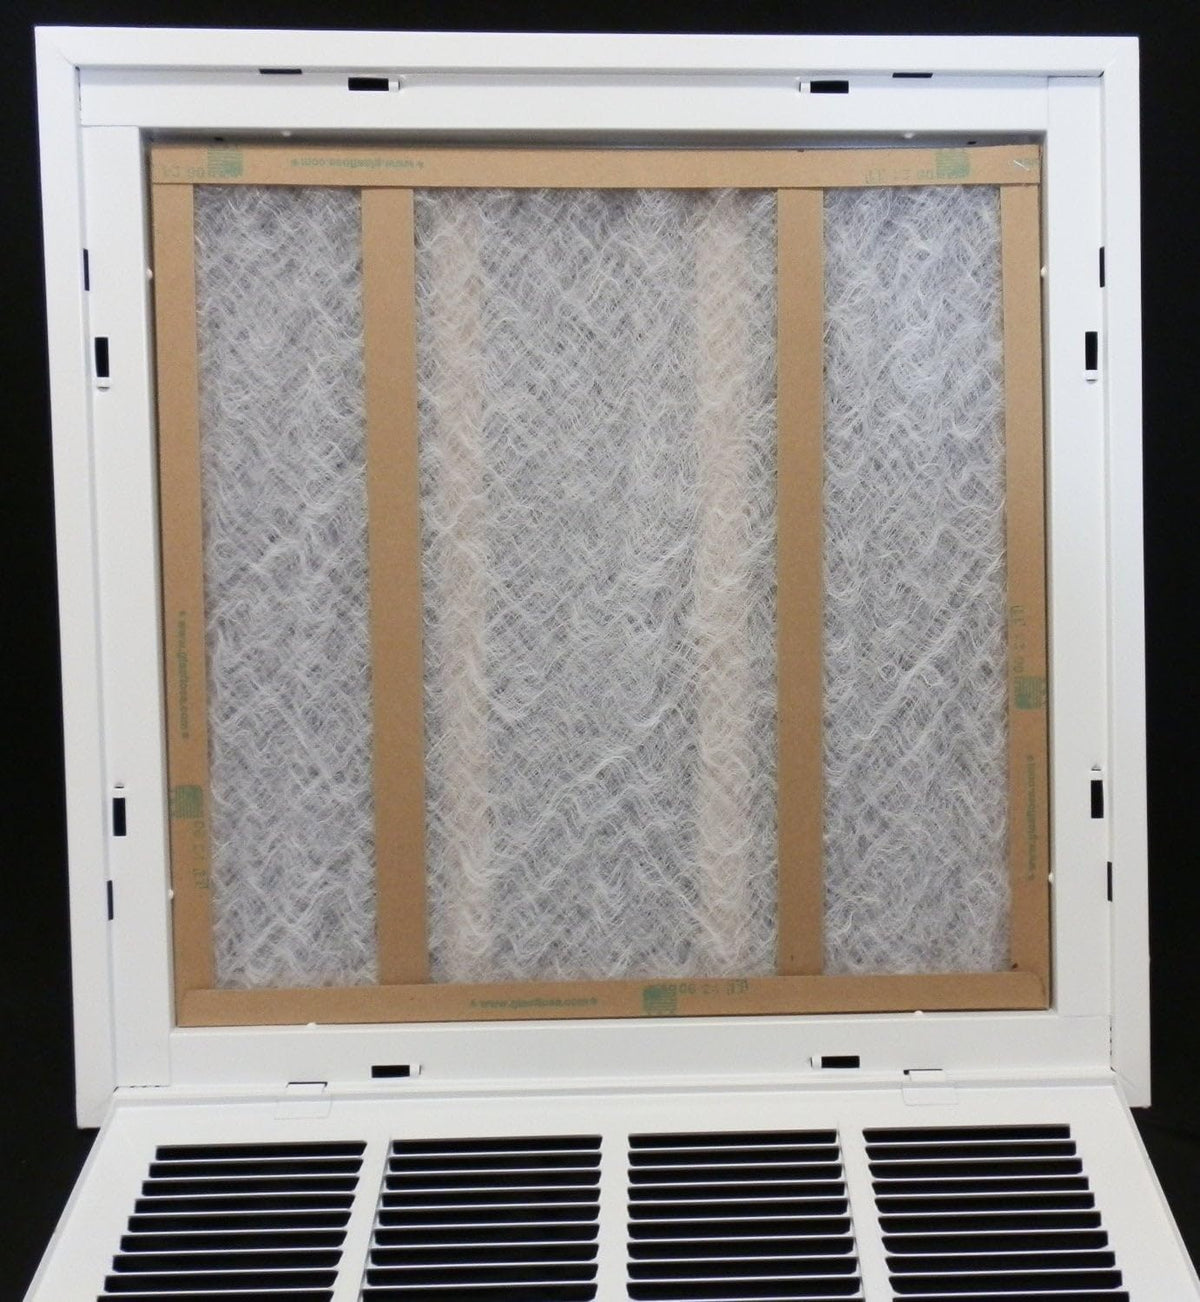 22&quot; X 22&quot; Steel Return Air Filter Grille for 1&quot; Filter - Fixed Hinged - [Outer Dimensions: 24 5/8&quot; X 24 5/8&quot;]